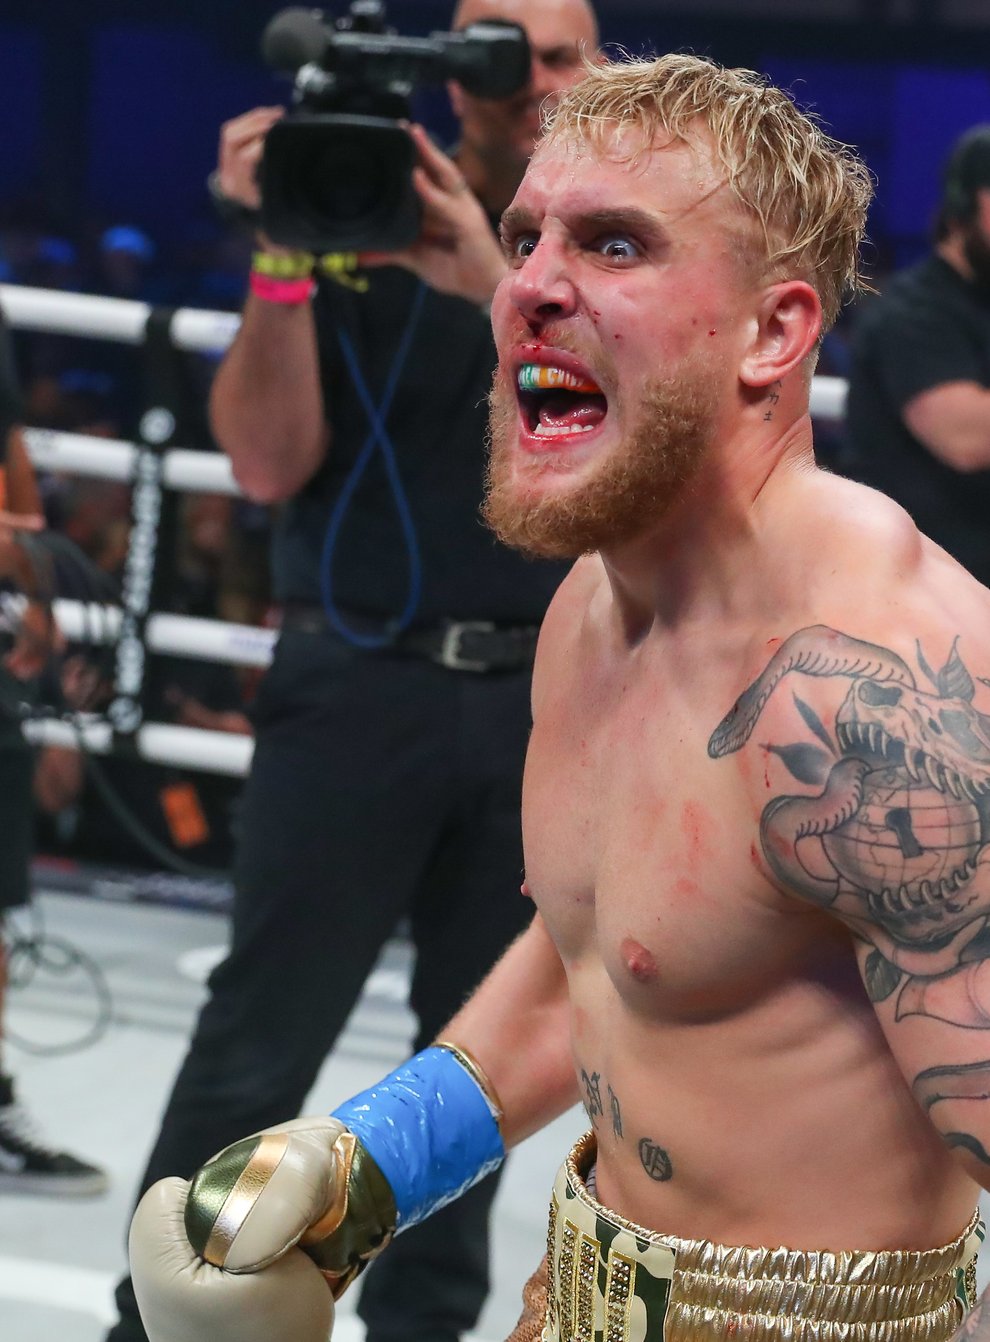 Jake Paul has said his brother will lose to Floyd Mayweather